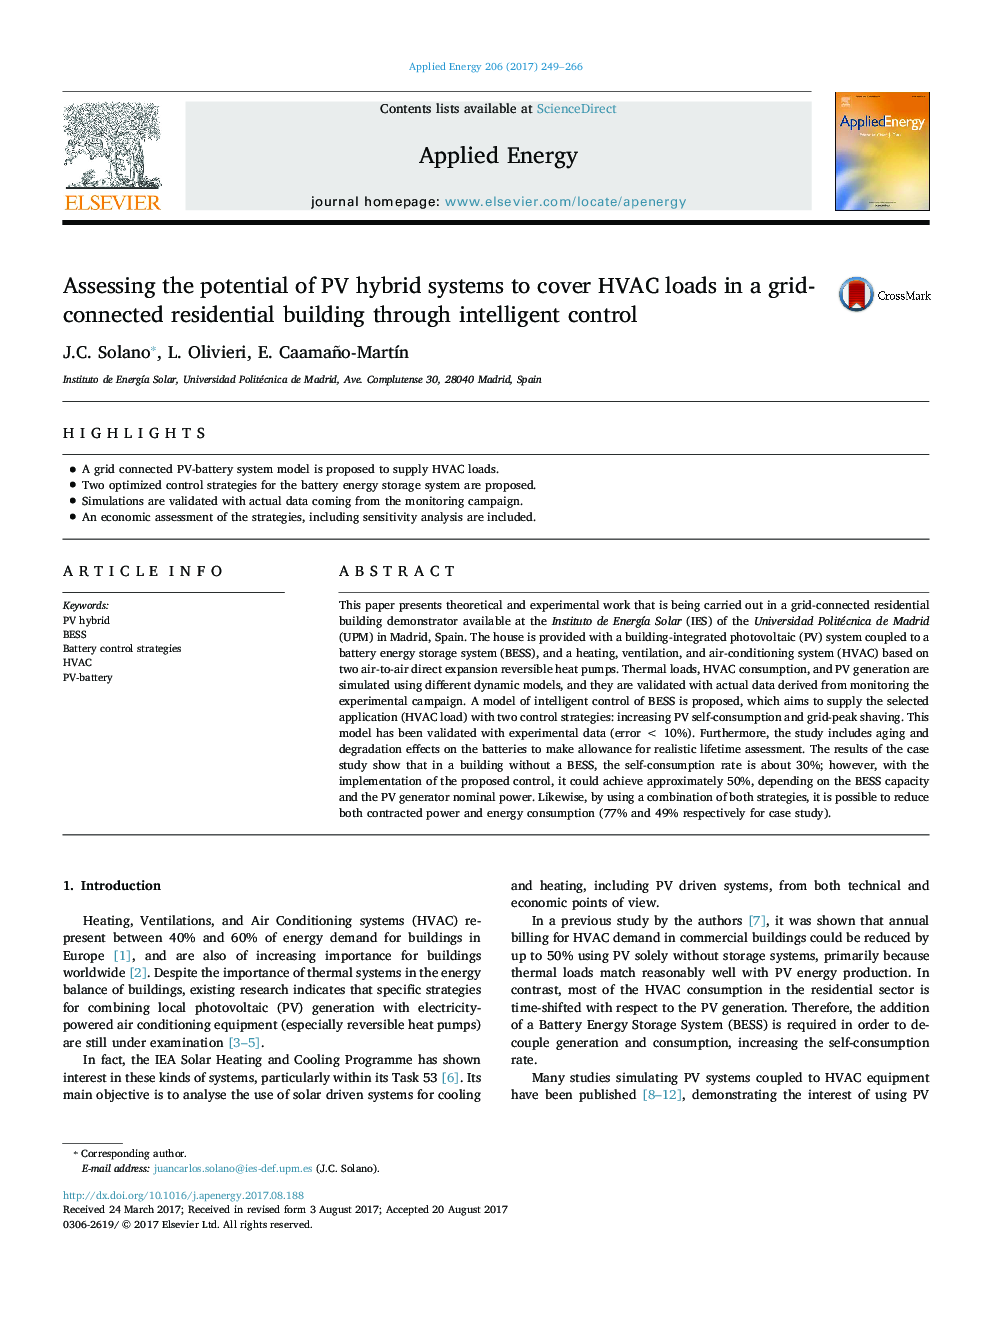 Assessing the potential of PV hybrid systems to cover HVAC loads in a grid-connected residential building through intelligent control